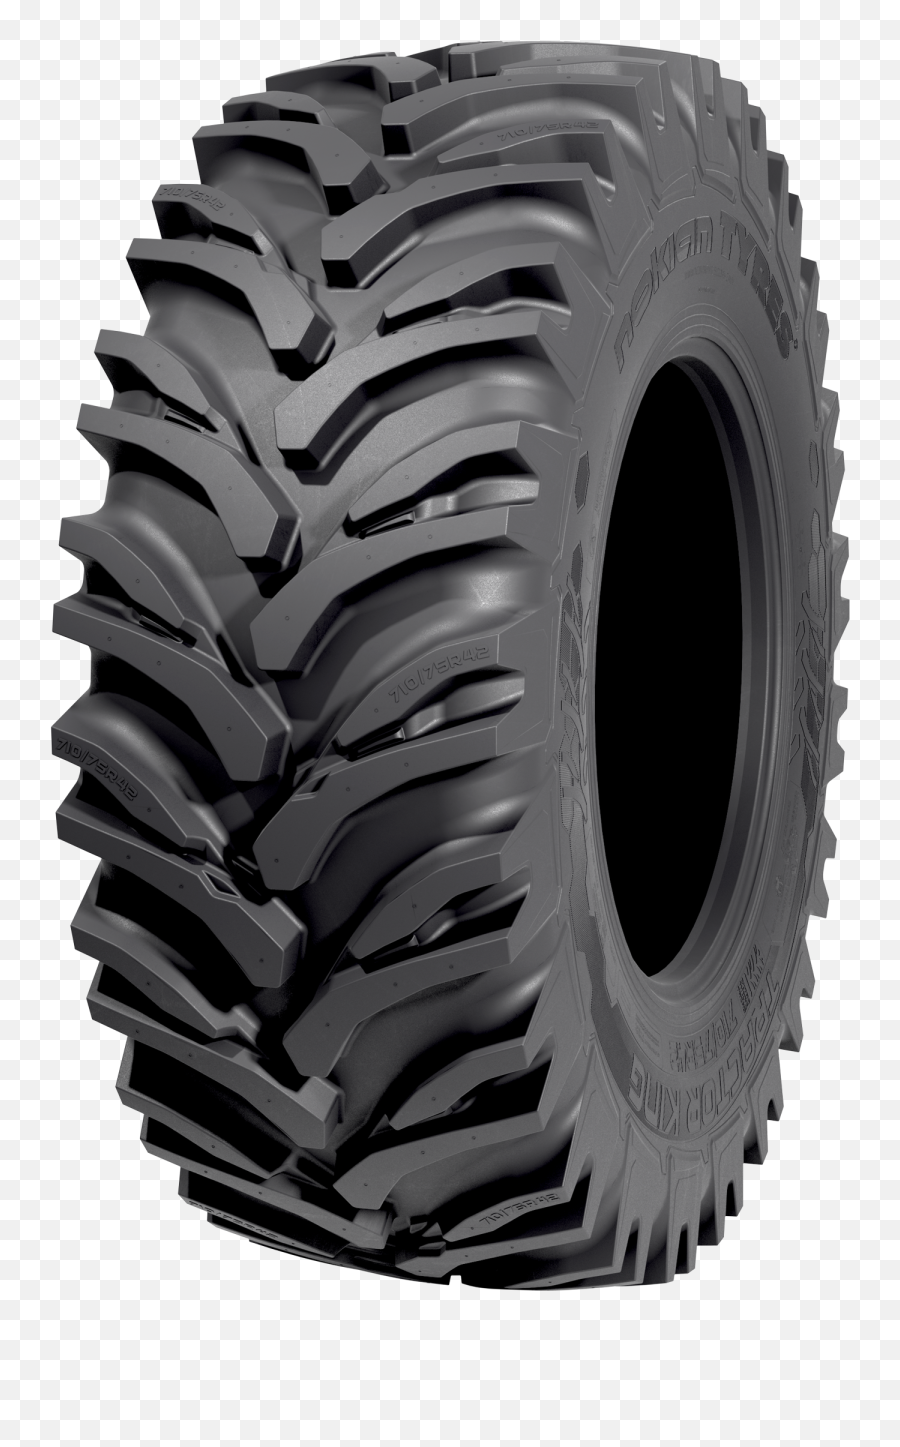 Nokian Tractor King - Nokian Tractor King Png,Tire Tread Png